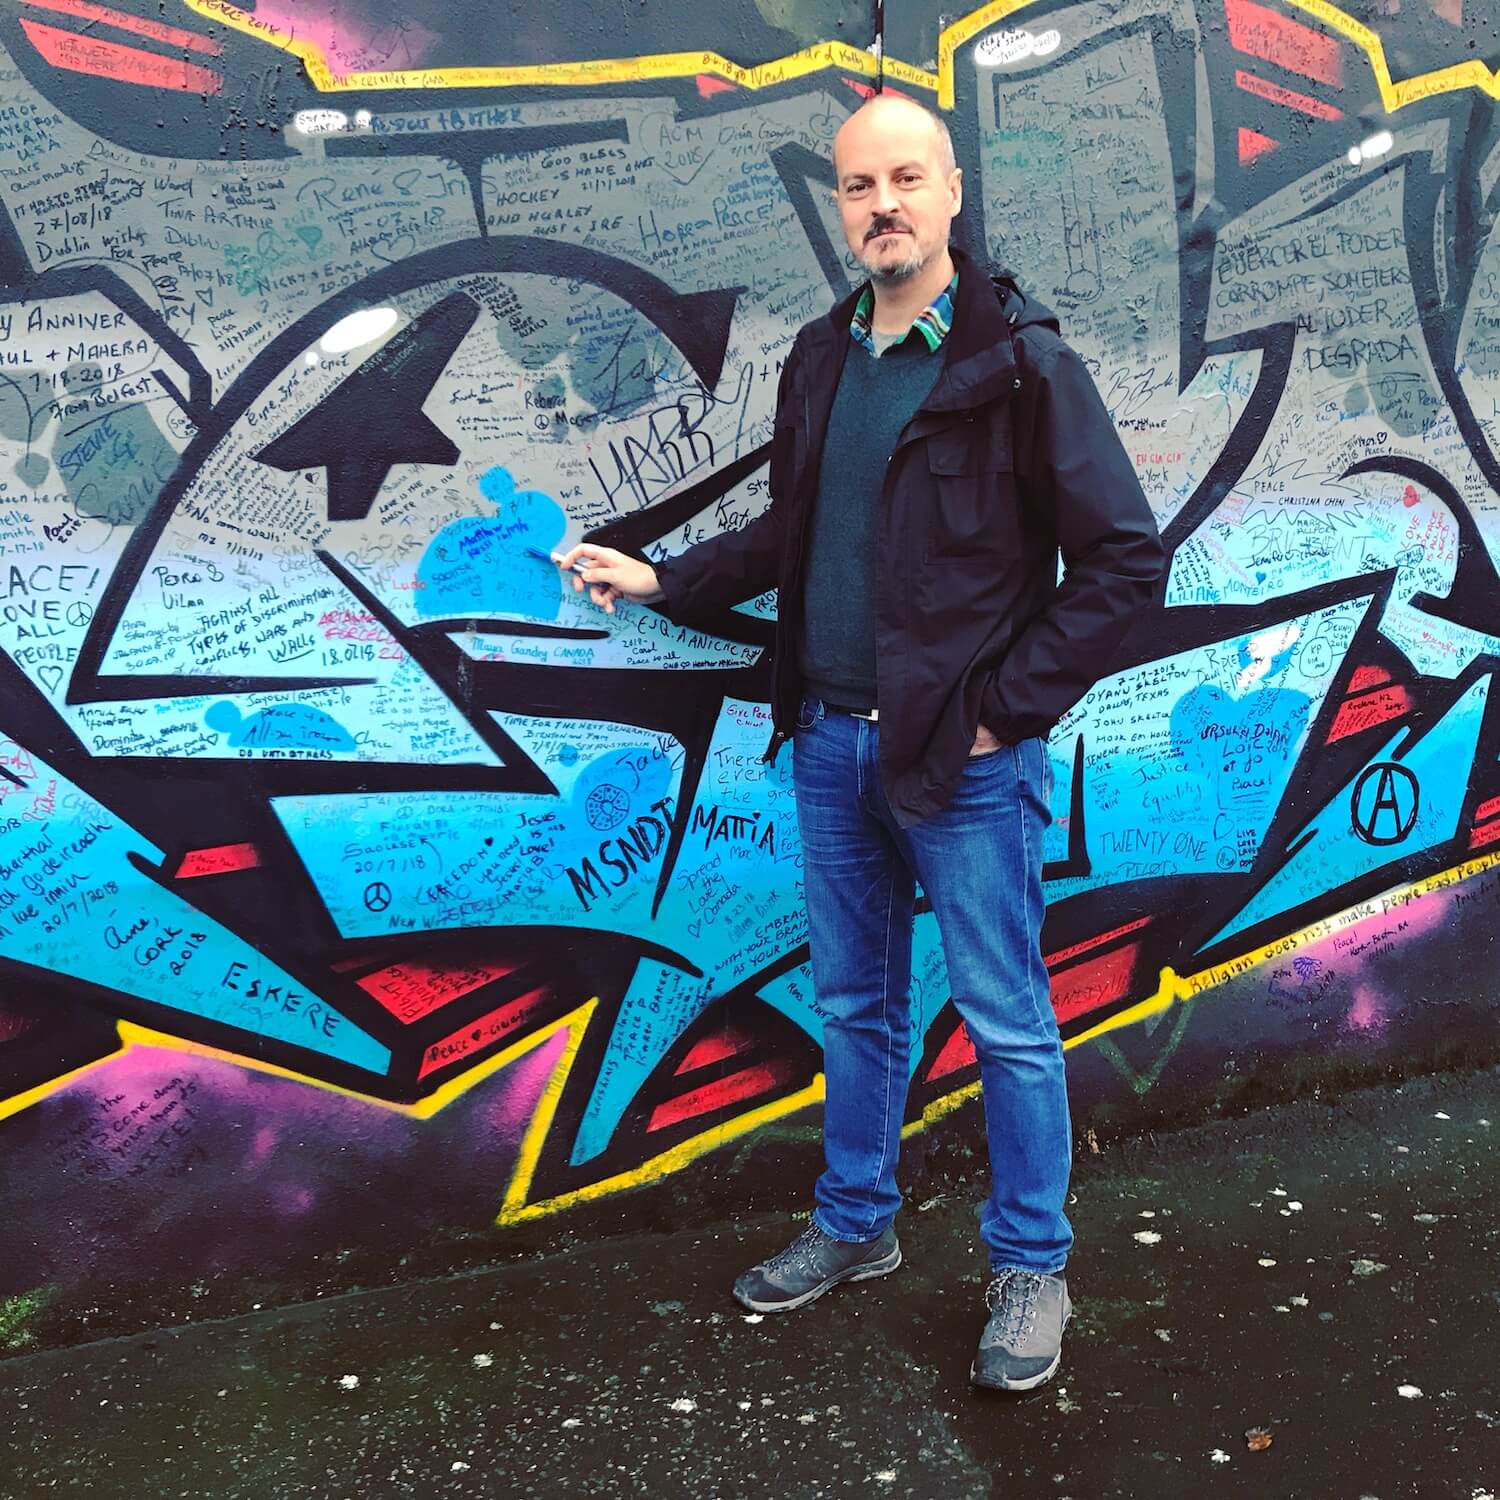 I stand at a remaining piece of the physical wall that used to divide Belfast into a Catholic area and a Protestant area. There is a variety of graffiti on the wall and I'm holding a pen that points to my fresh signature and date on the wall.